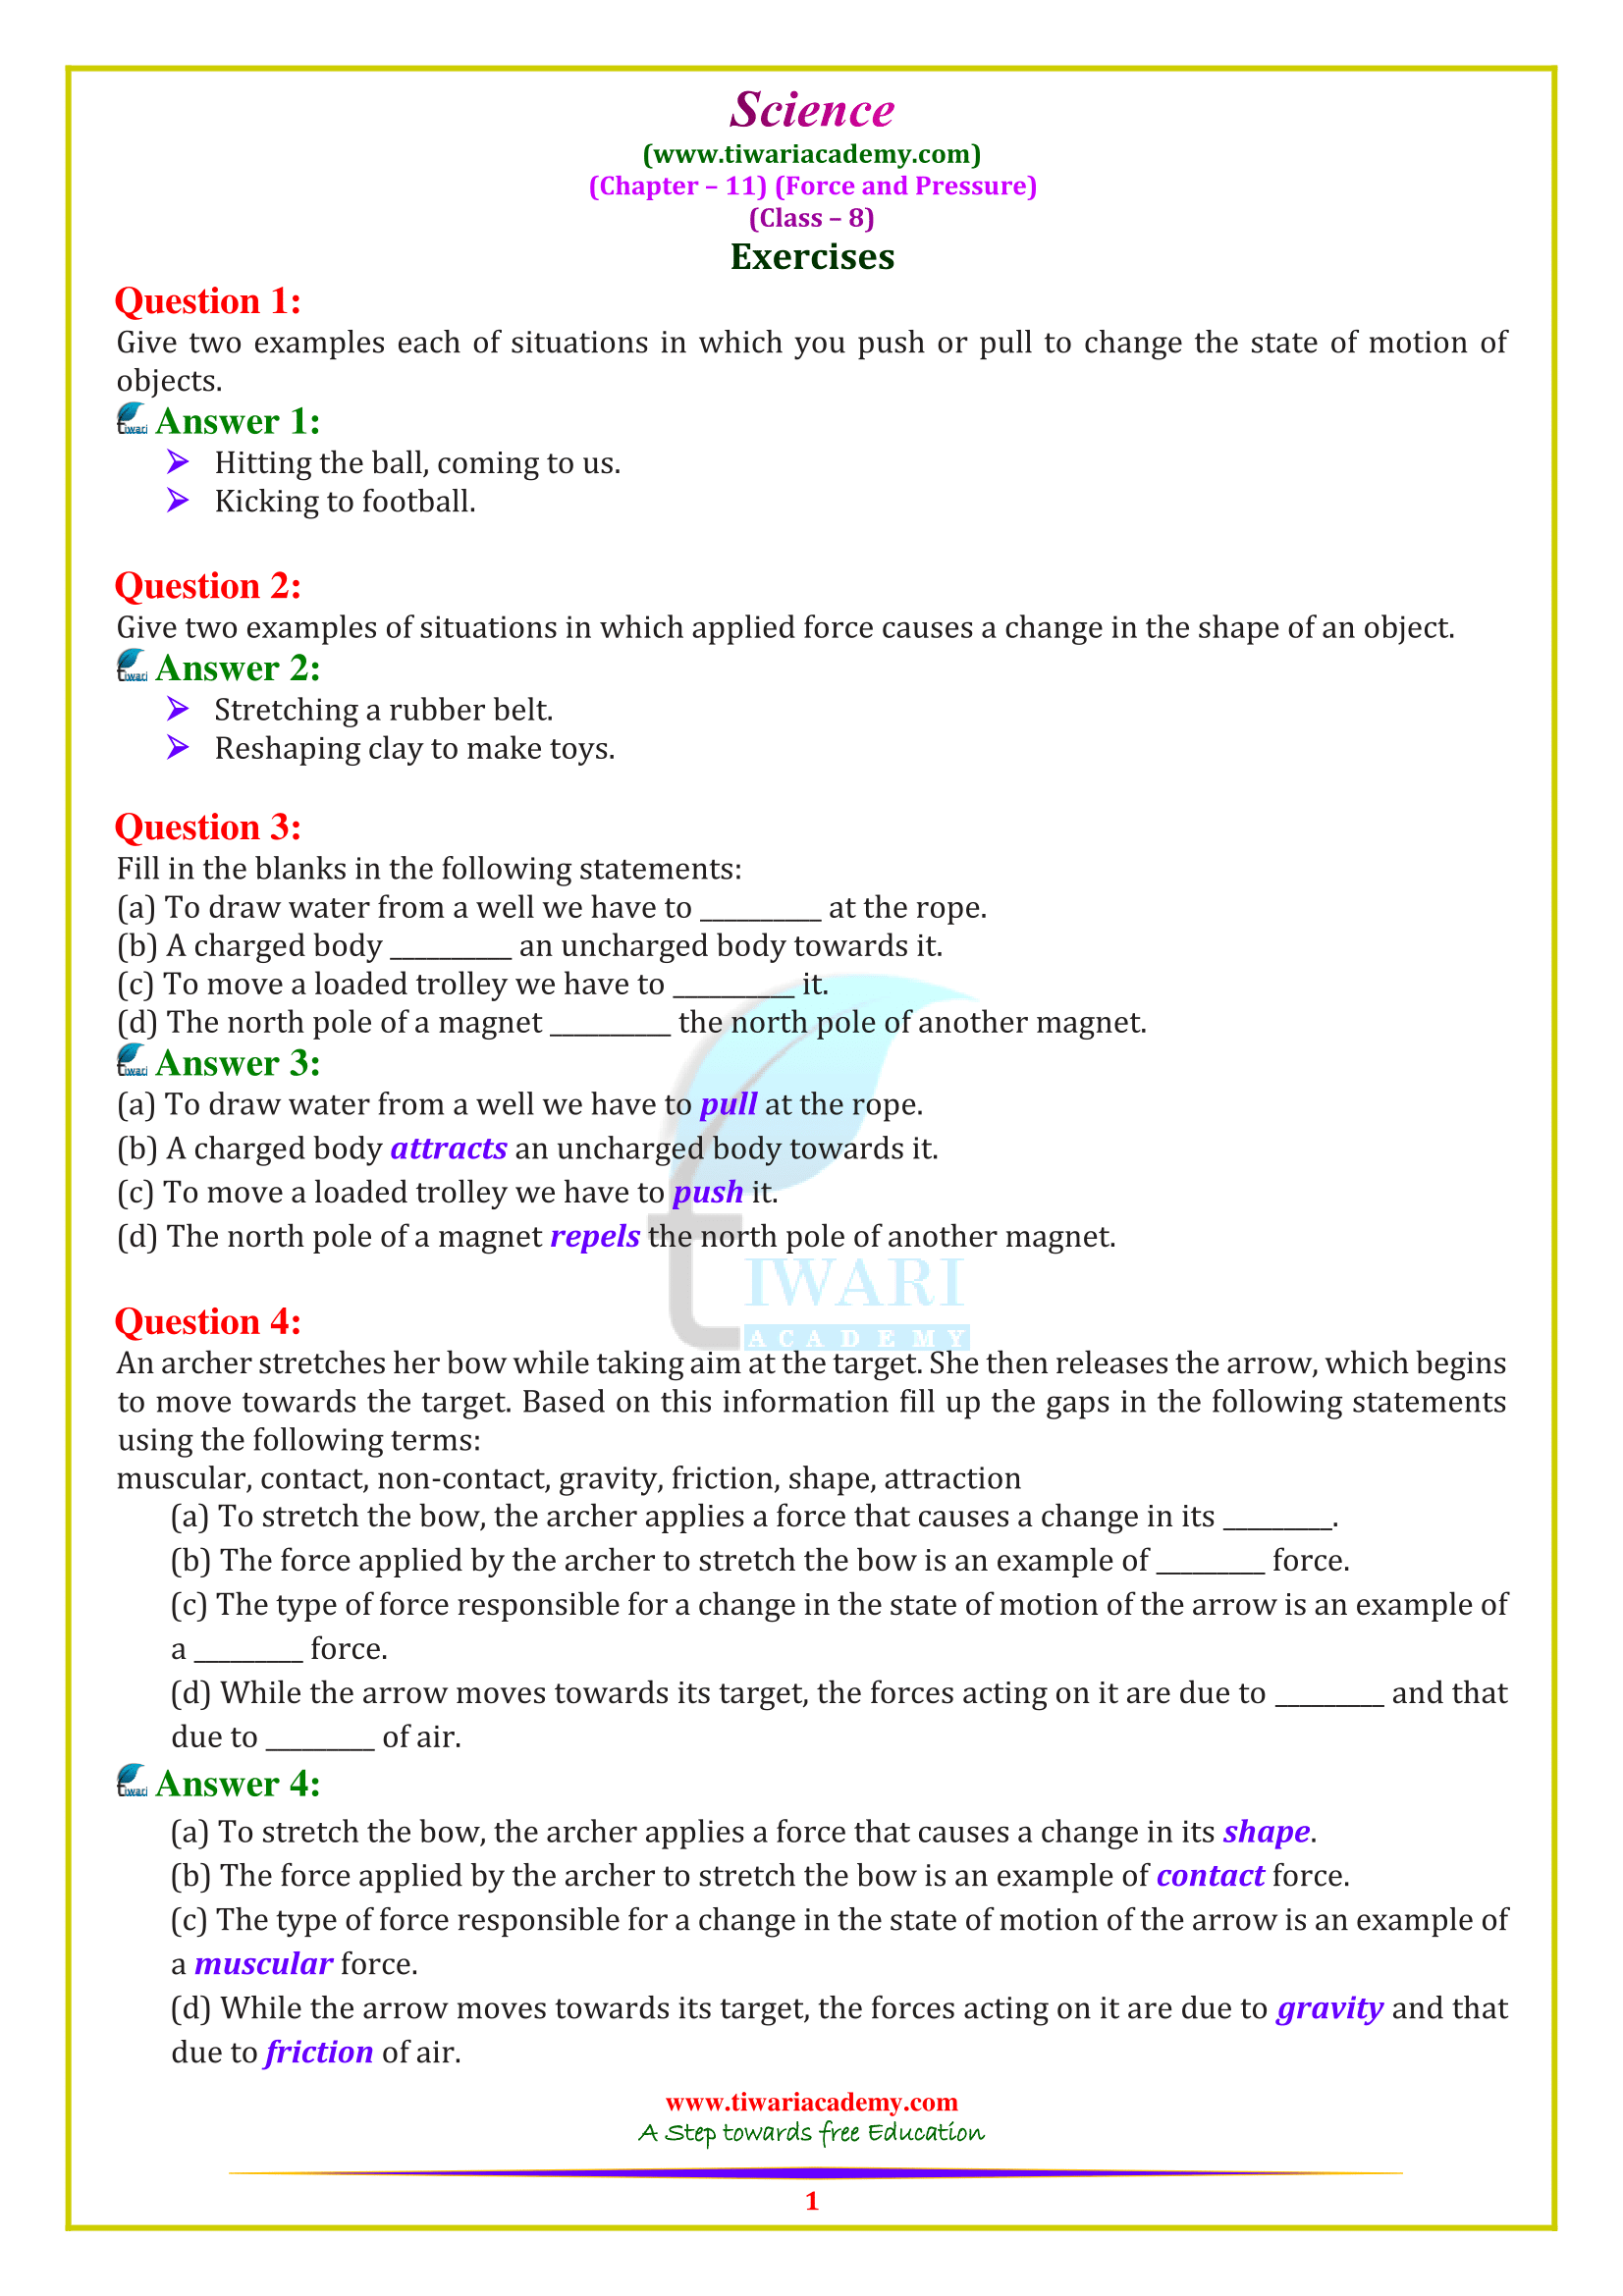 homework for class 8 science